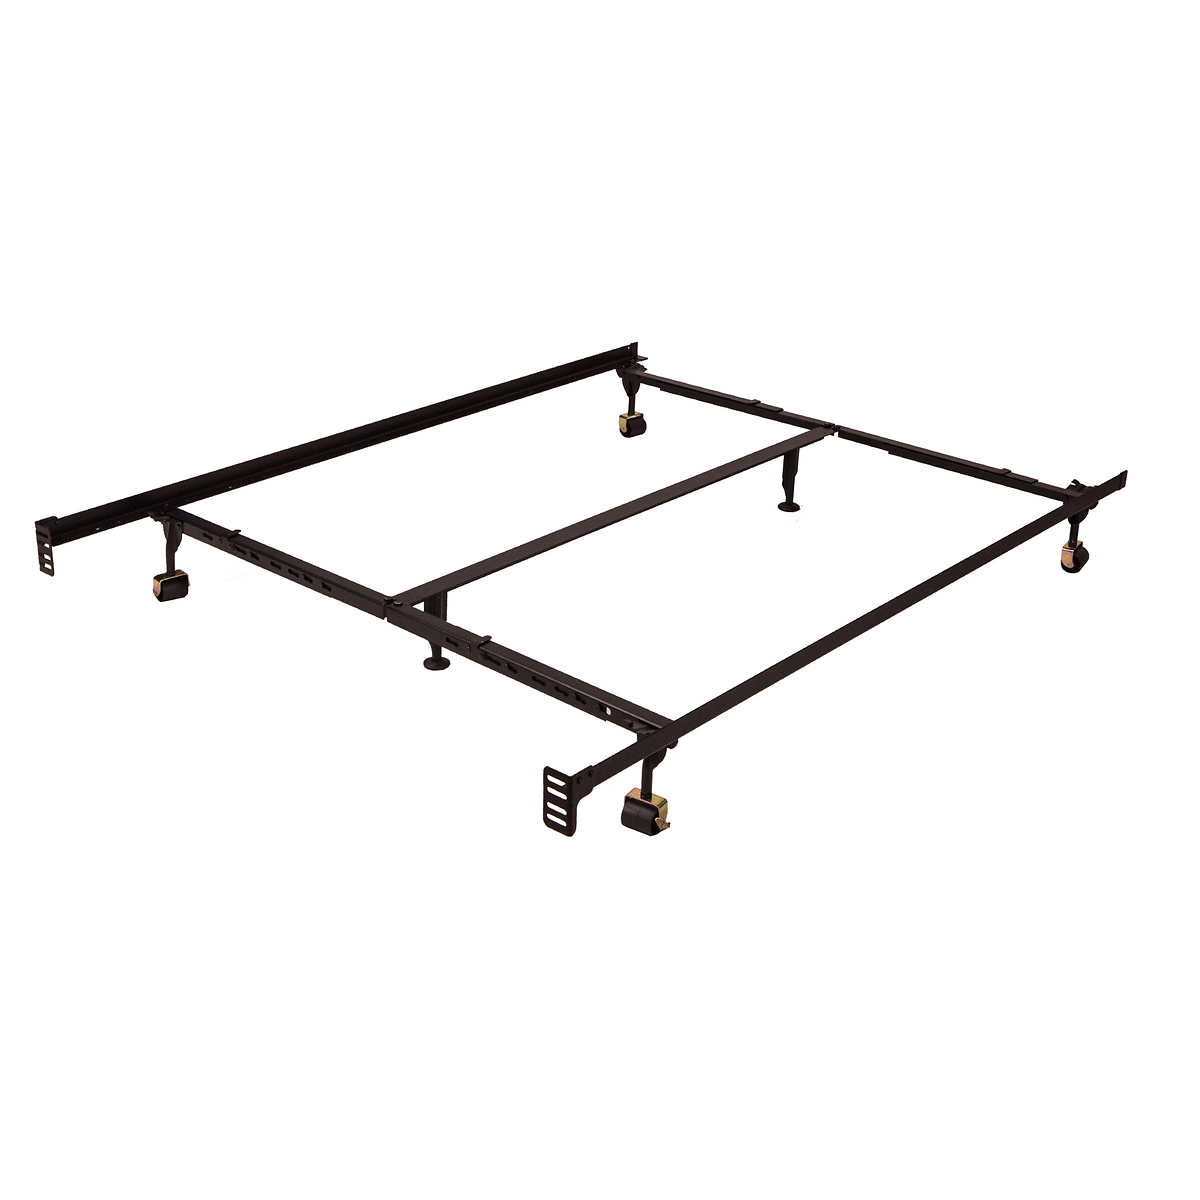 Premium Universal Lev R Lock Bed Frame, How To Build A California King Size Bed Frame